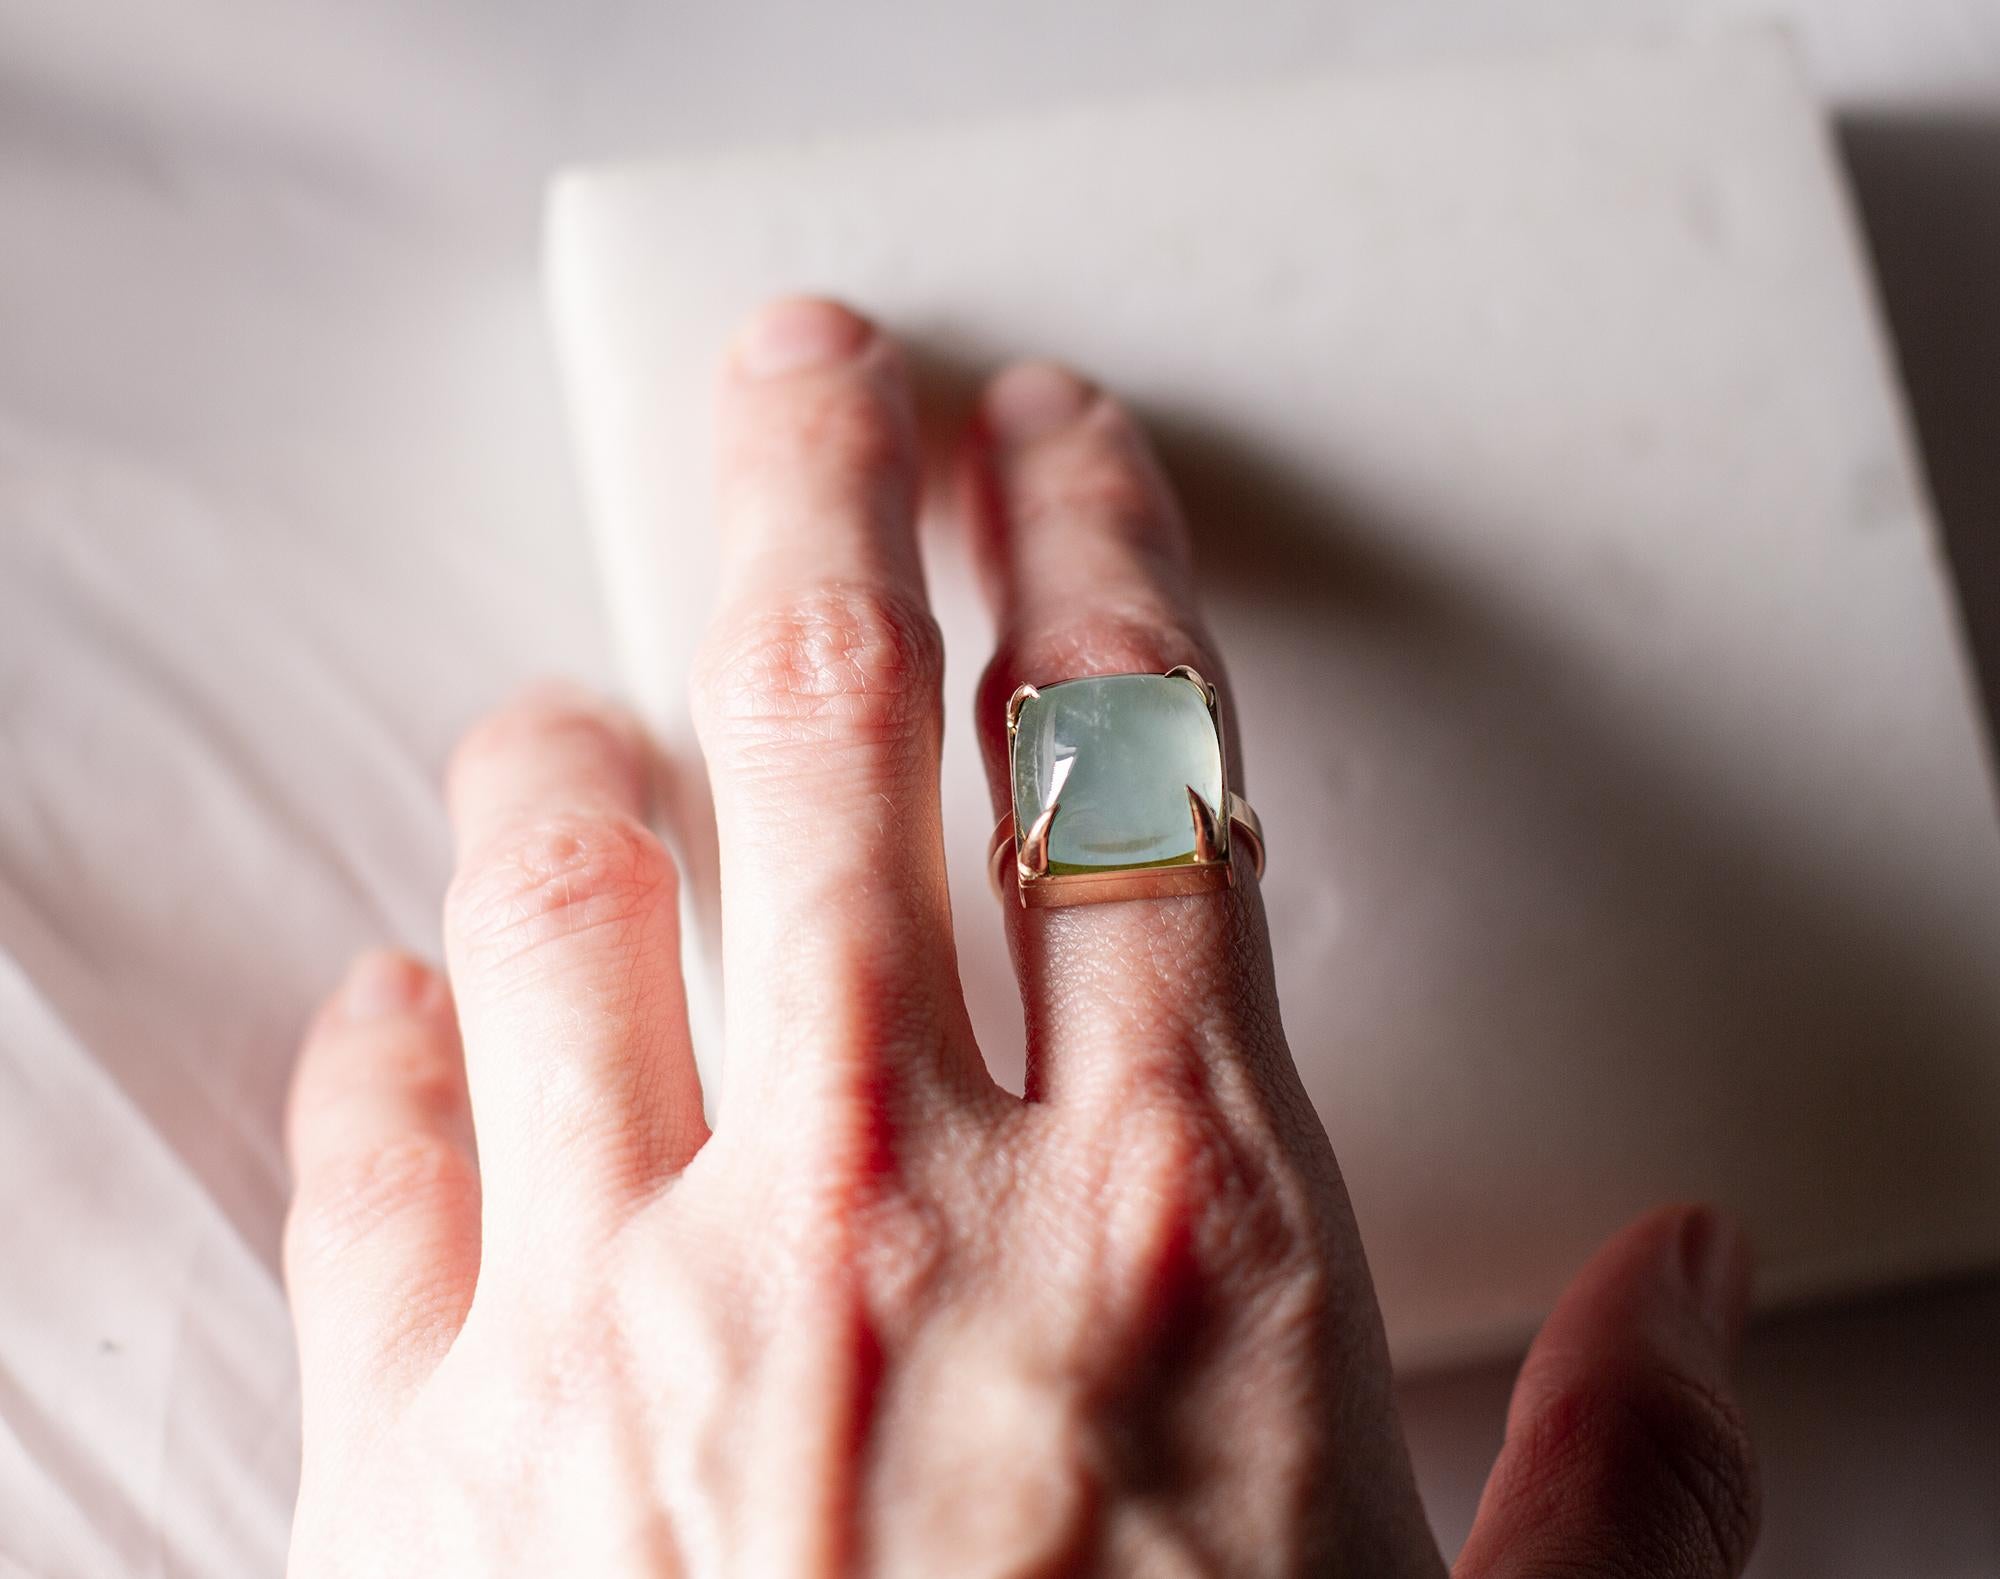 This ring is made of 18 karat rose gold with sugarloaf cut natural aquamarine. 

When for most of the gem it works the way: the smaller prongs the better. This is the shape and size of the gem that we really enjoy to see avoiding the typical for